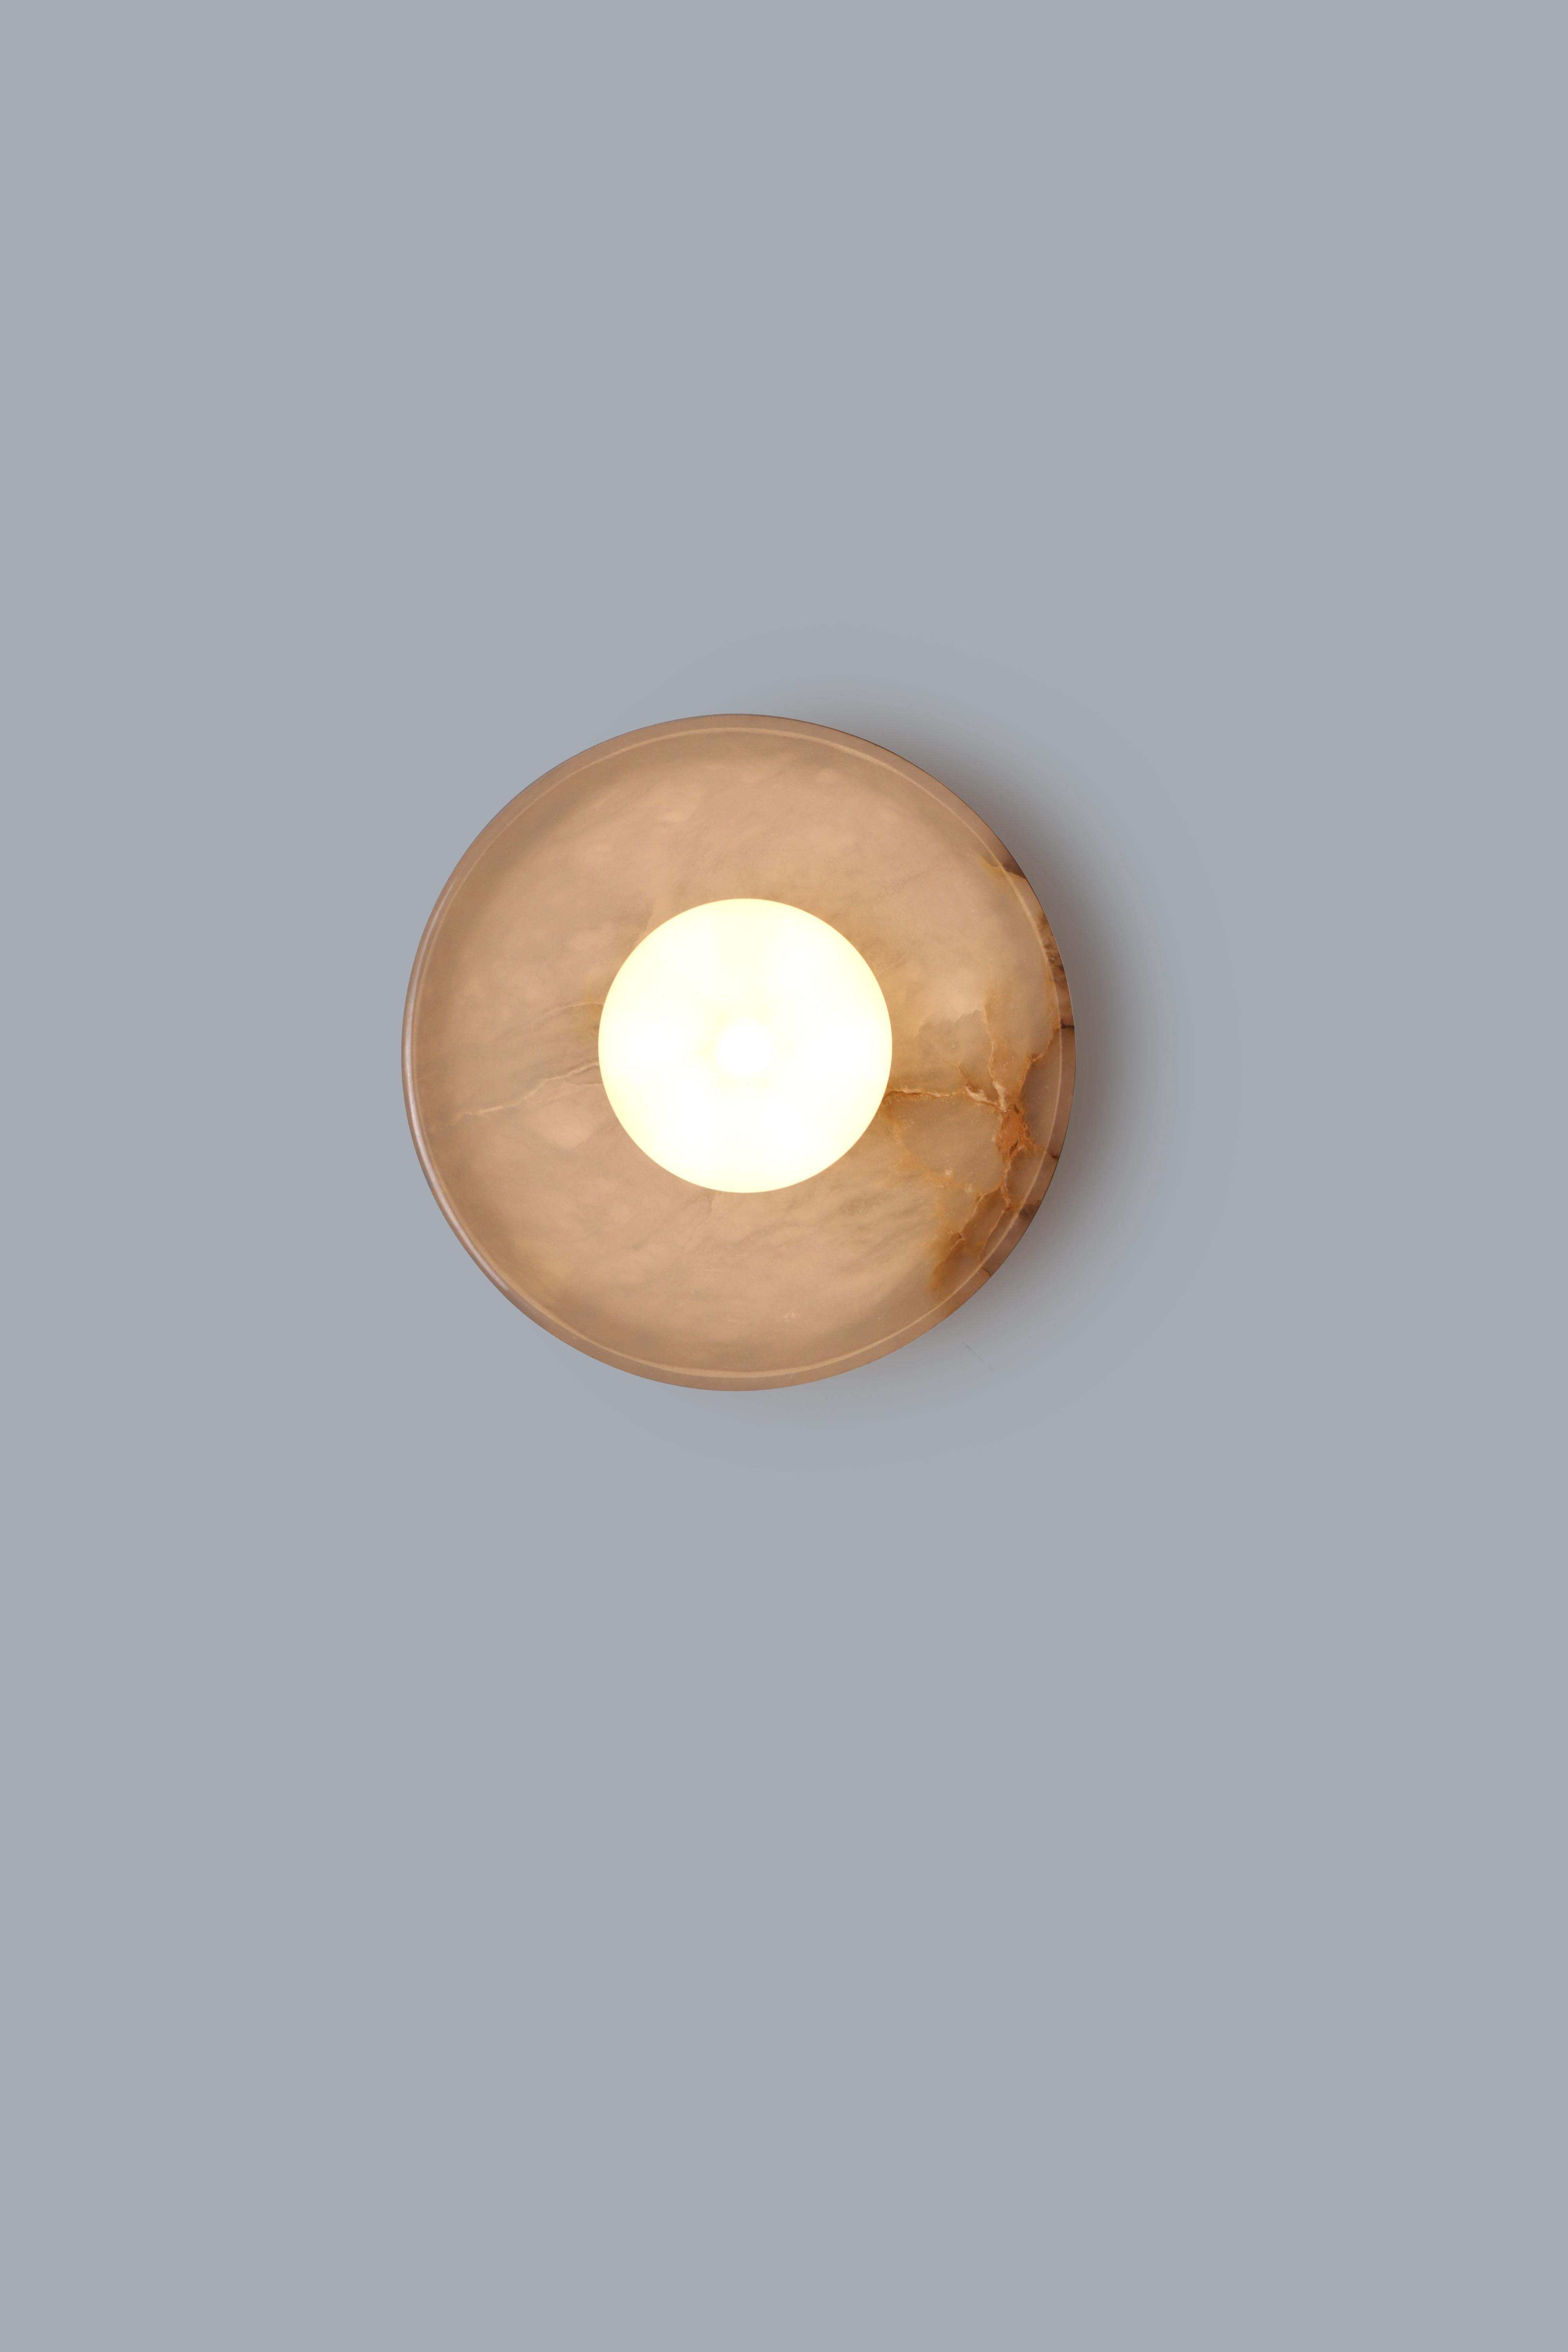 Blot Marble Dome Wall Sconce by Lamp Shaper
Dimensions: D 14 x W 23 x H 23 cm.
Materials: Brass, glass and marble.

Different finishes available: raw brass, aged brass, burnt brass and brushed brass Please contact us.

All our lamps can be wired